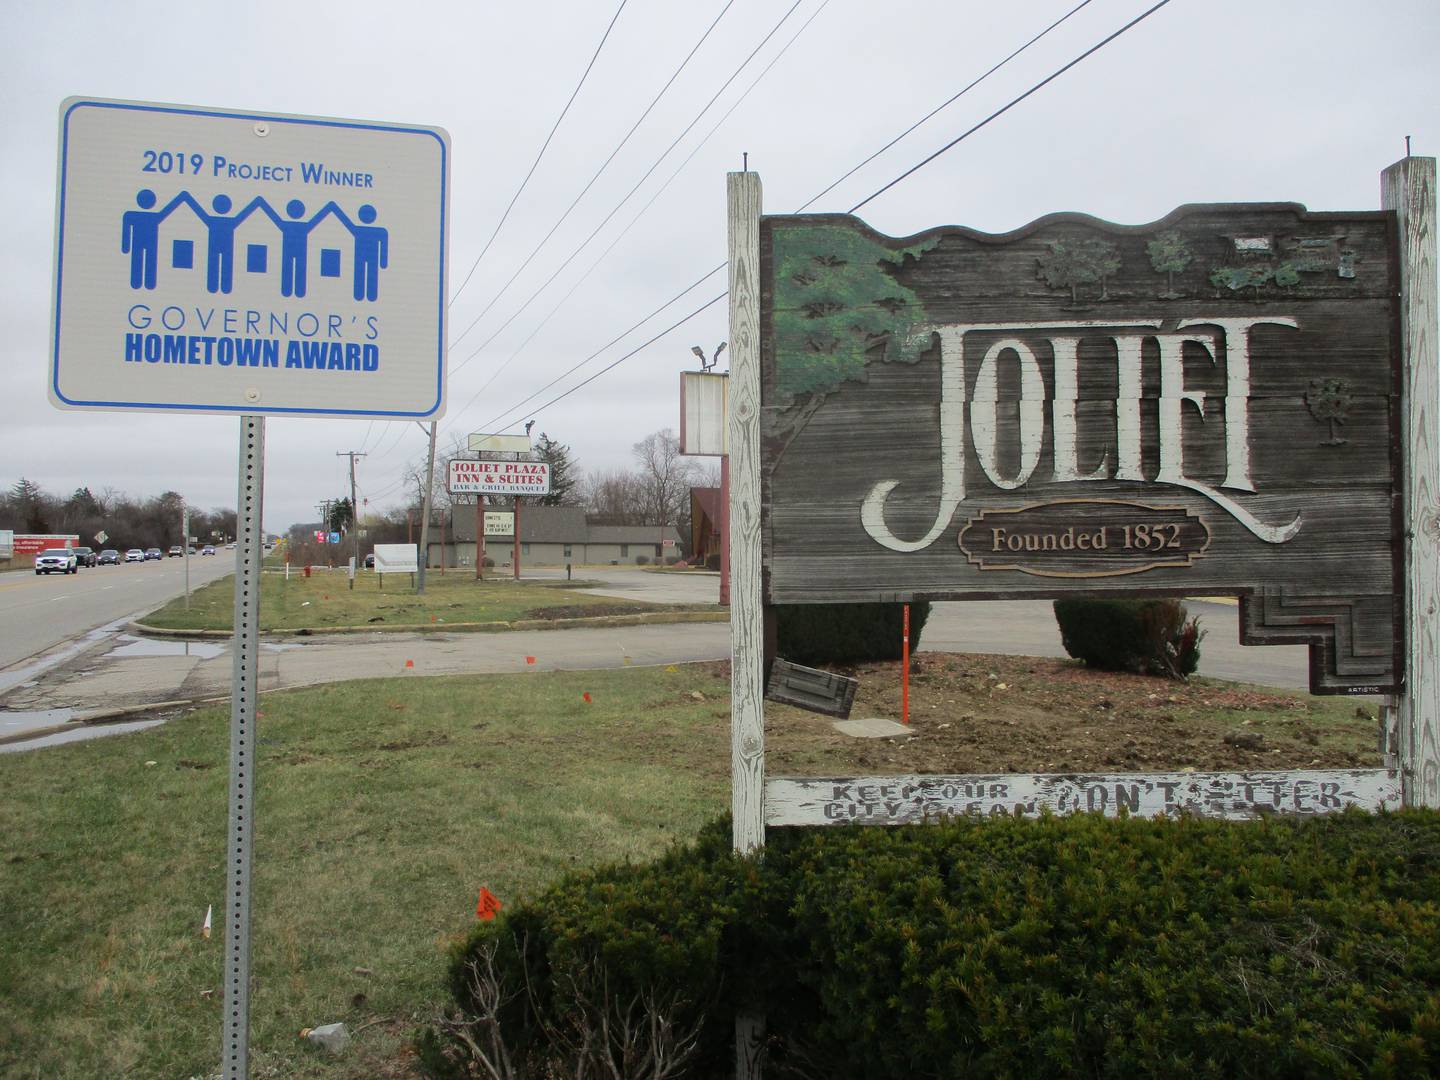 A Joliet monument sign marks the Jefferson Street entryway to the city off of Interstate 55 in front of the Joliet Plaza Inn,. Hotel signs and the Joliet monument sign are in deteriorating conditions. March 5, 2024.